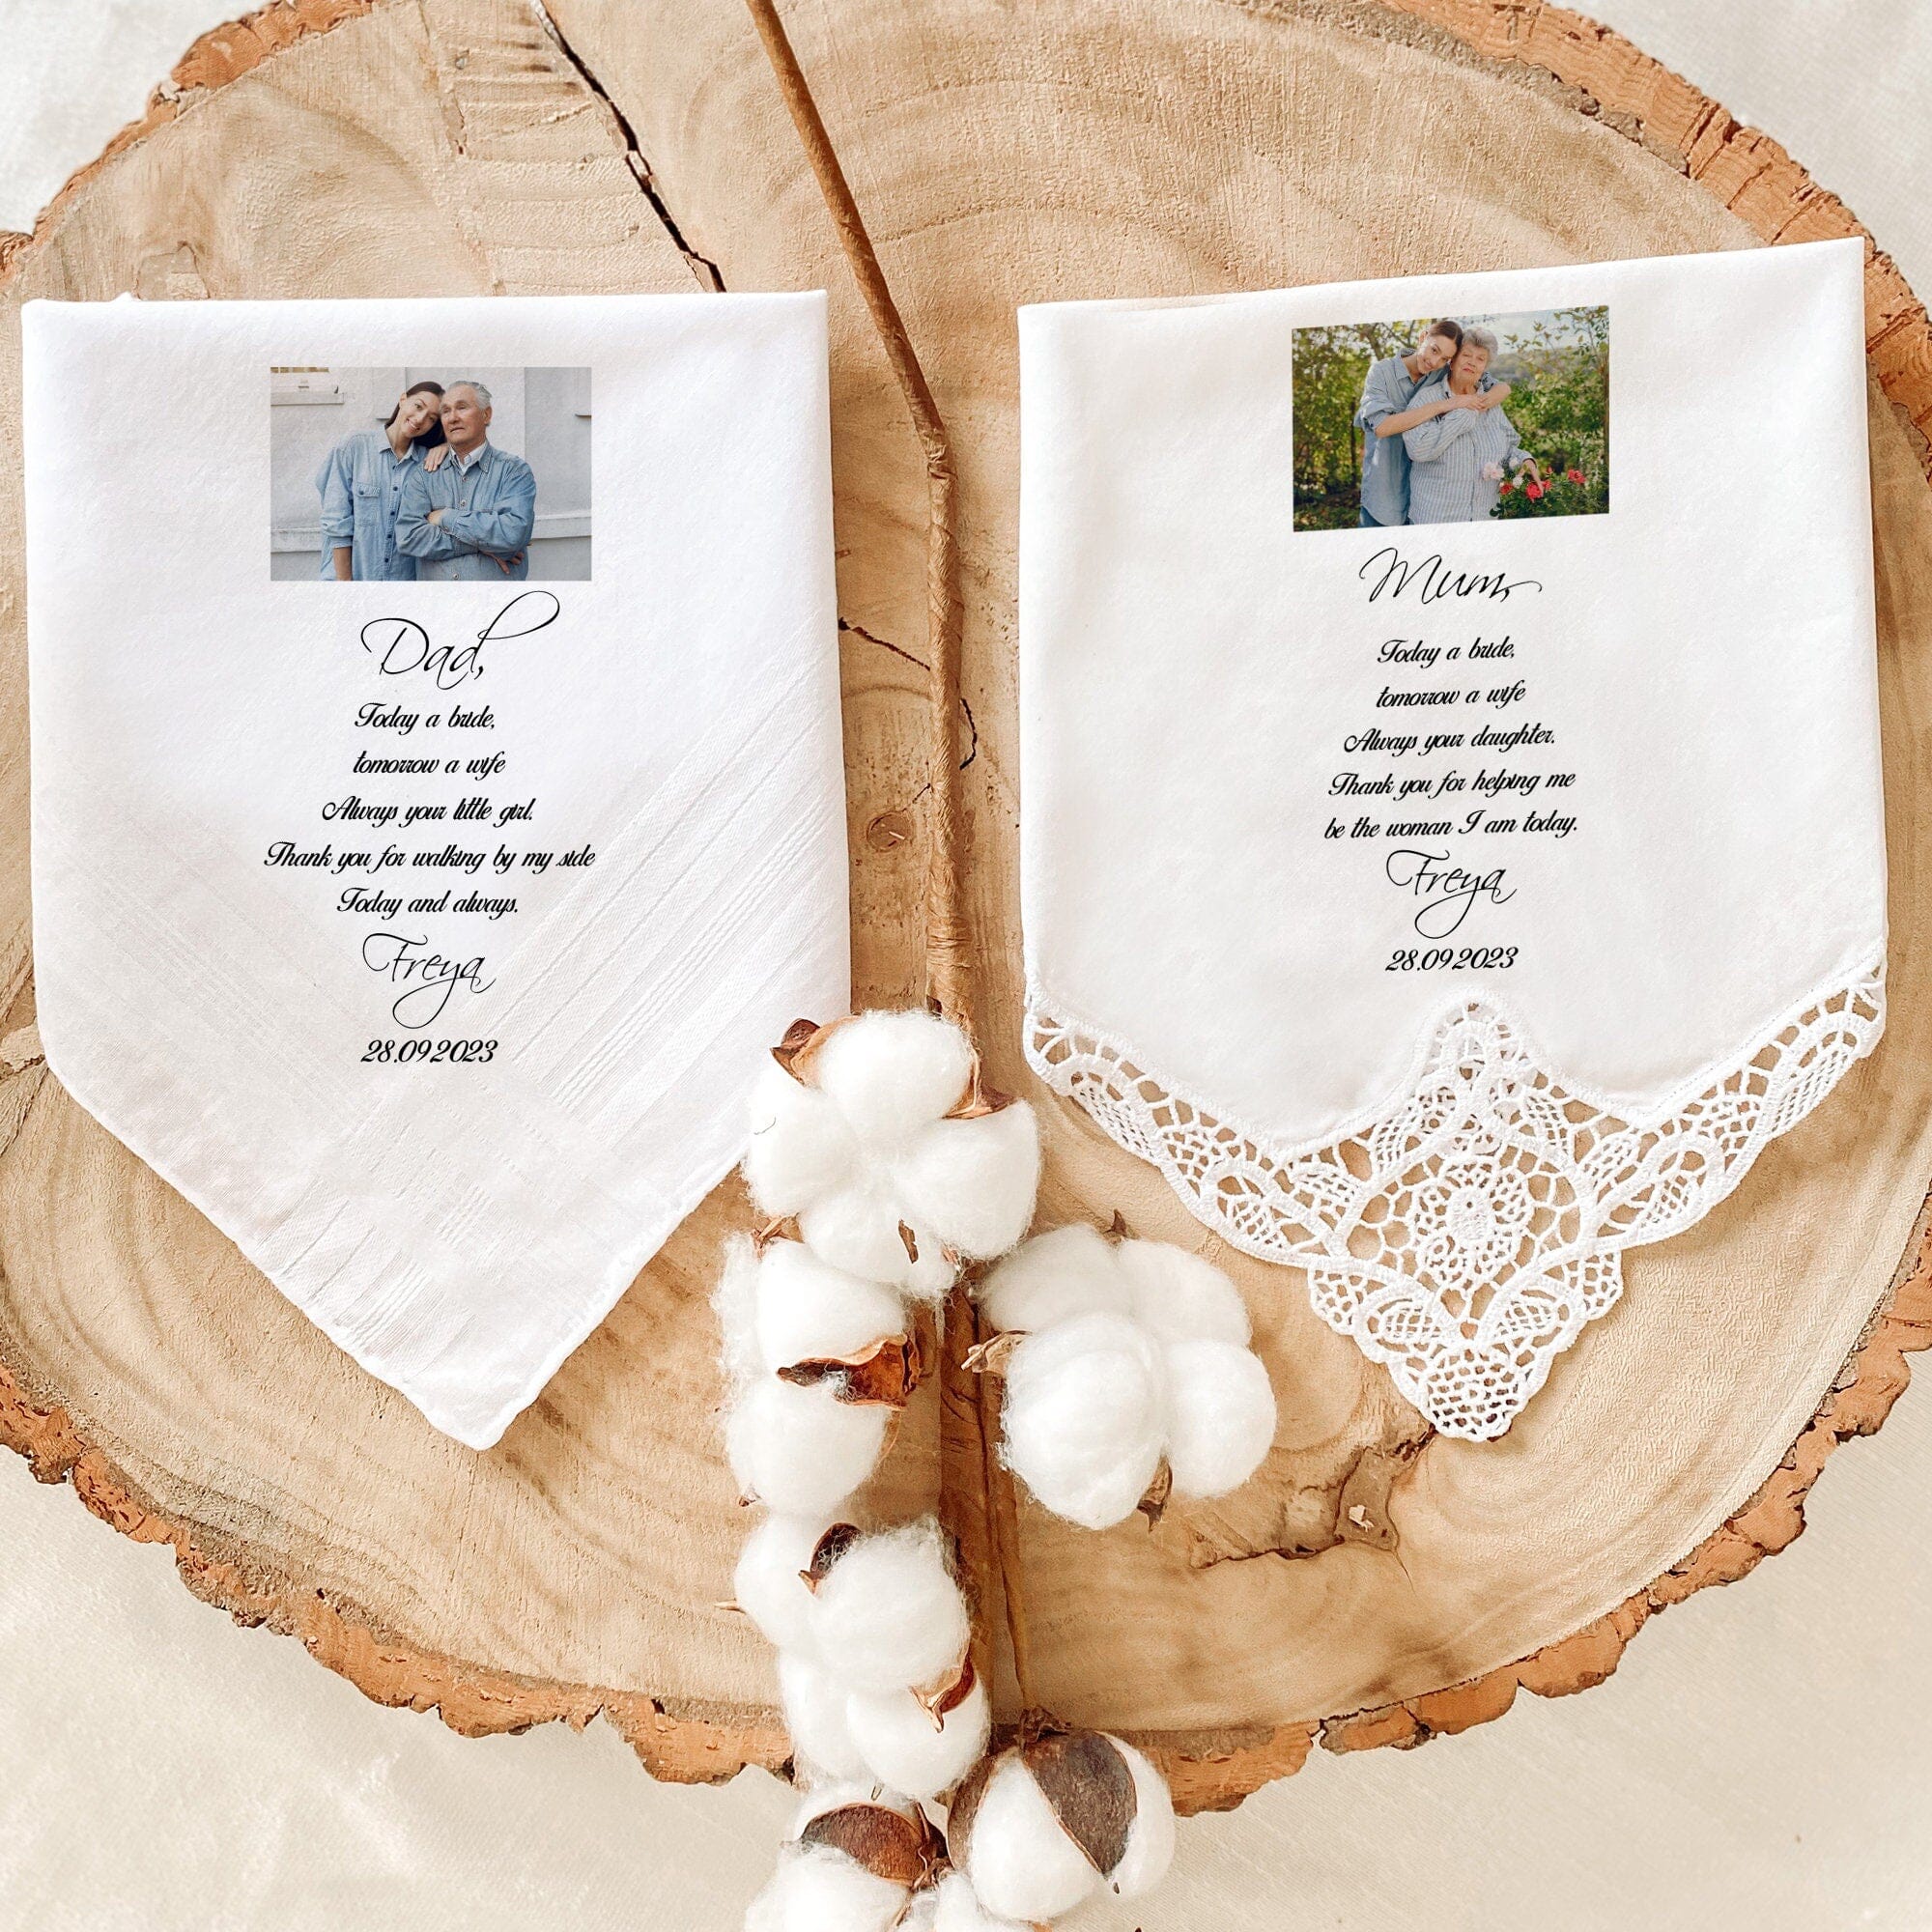 Personalised Wedding Gift For Parents With Mum Dad Photo, Wedding Handkerchief